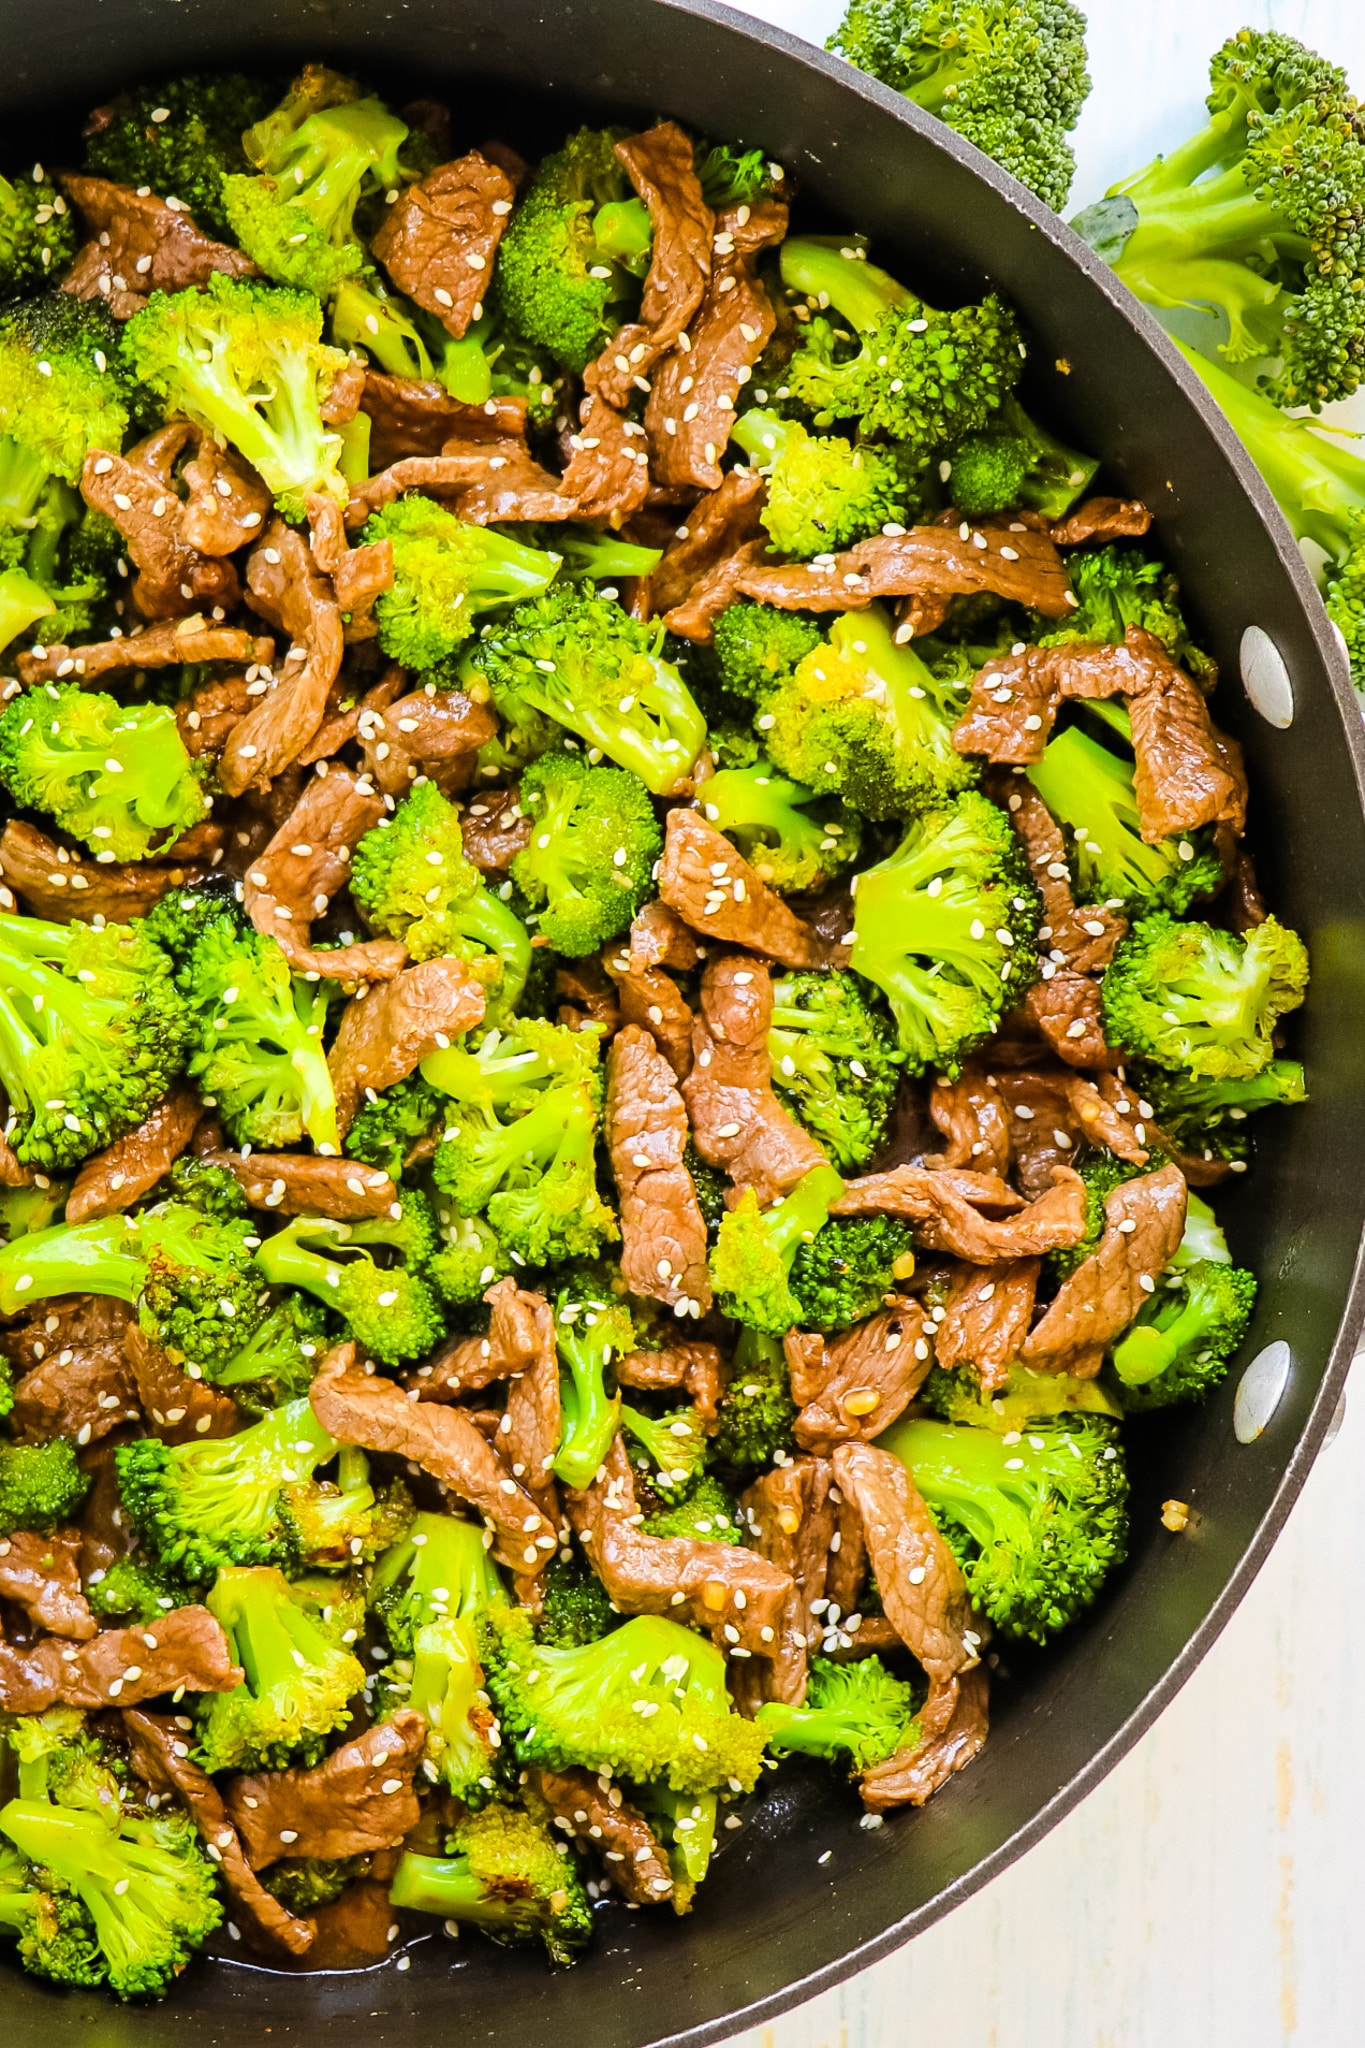 Beef and broccoli stir fry in large skillet.